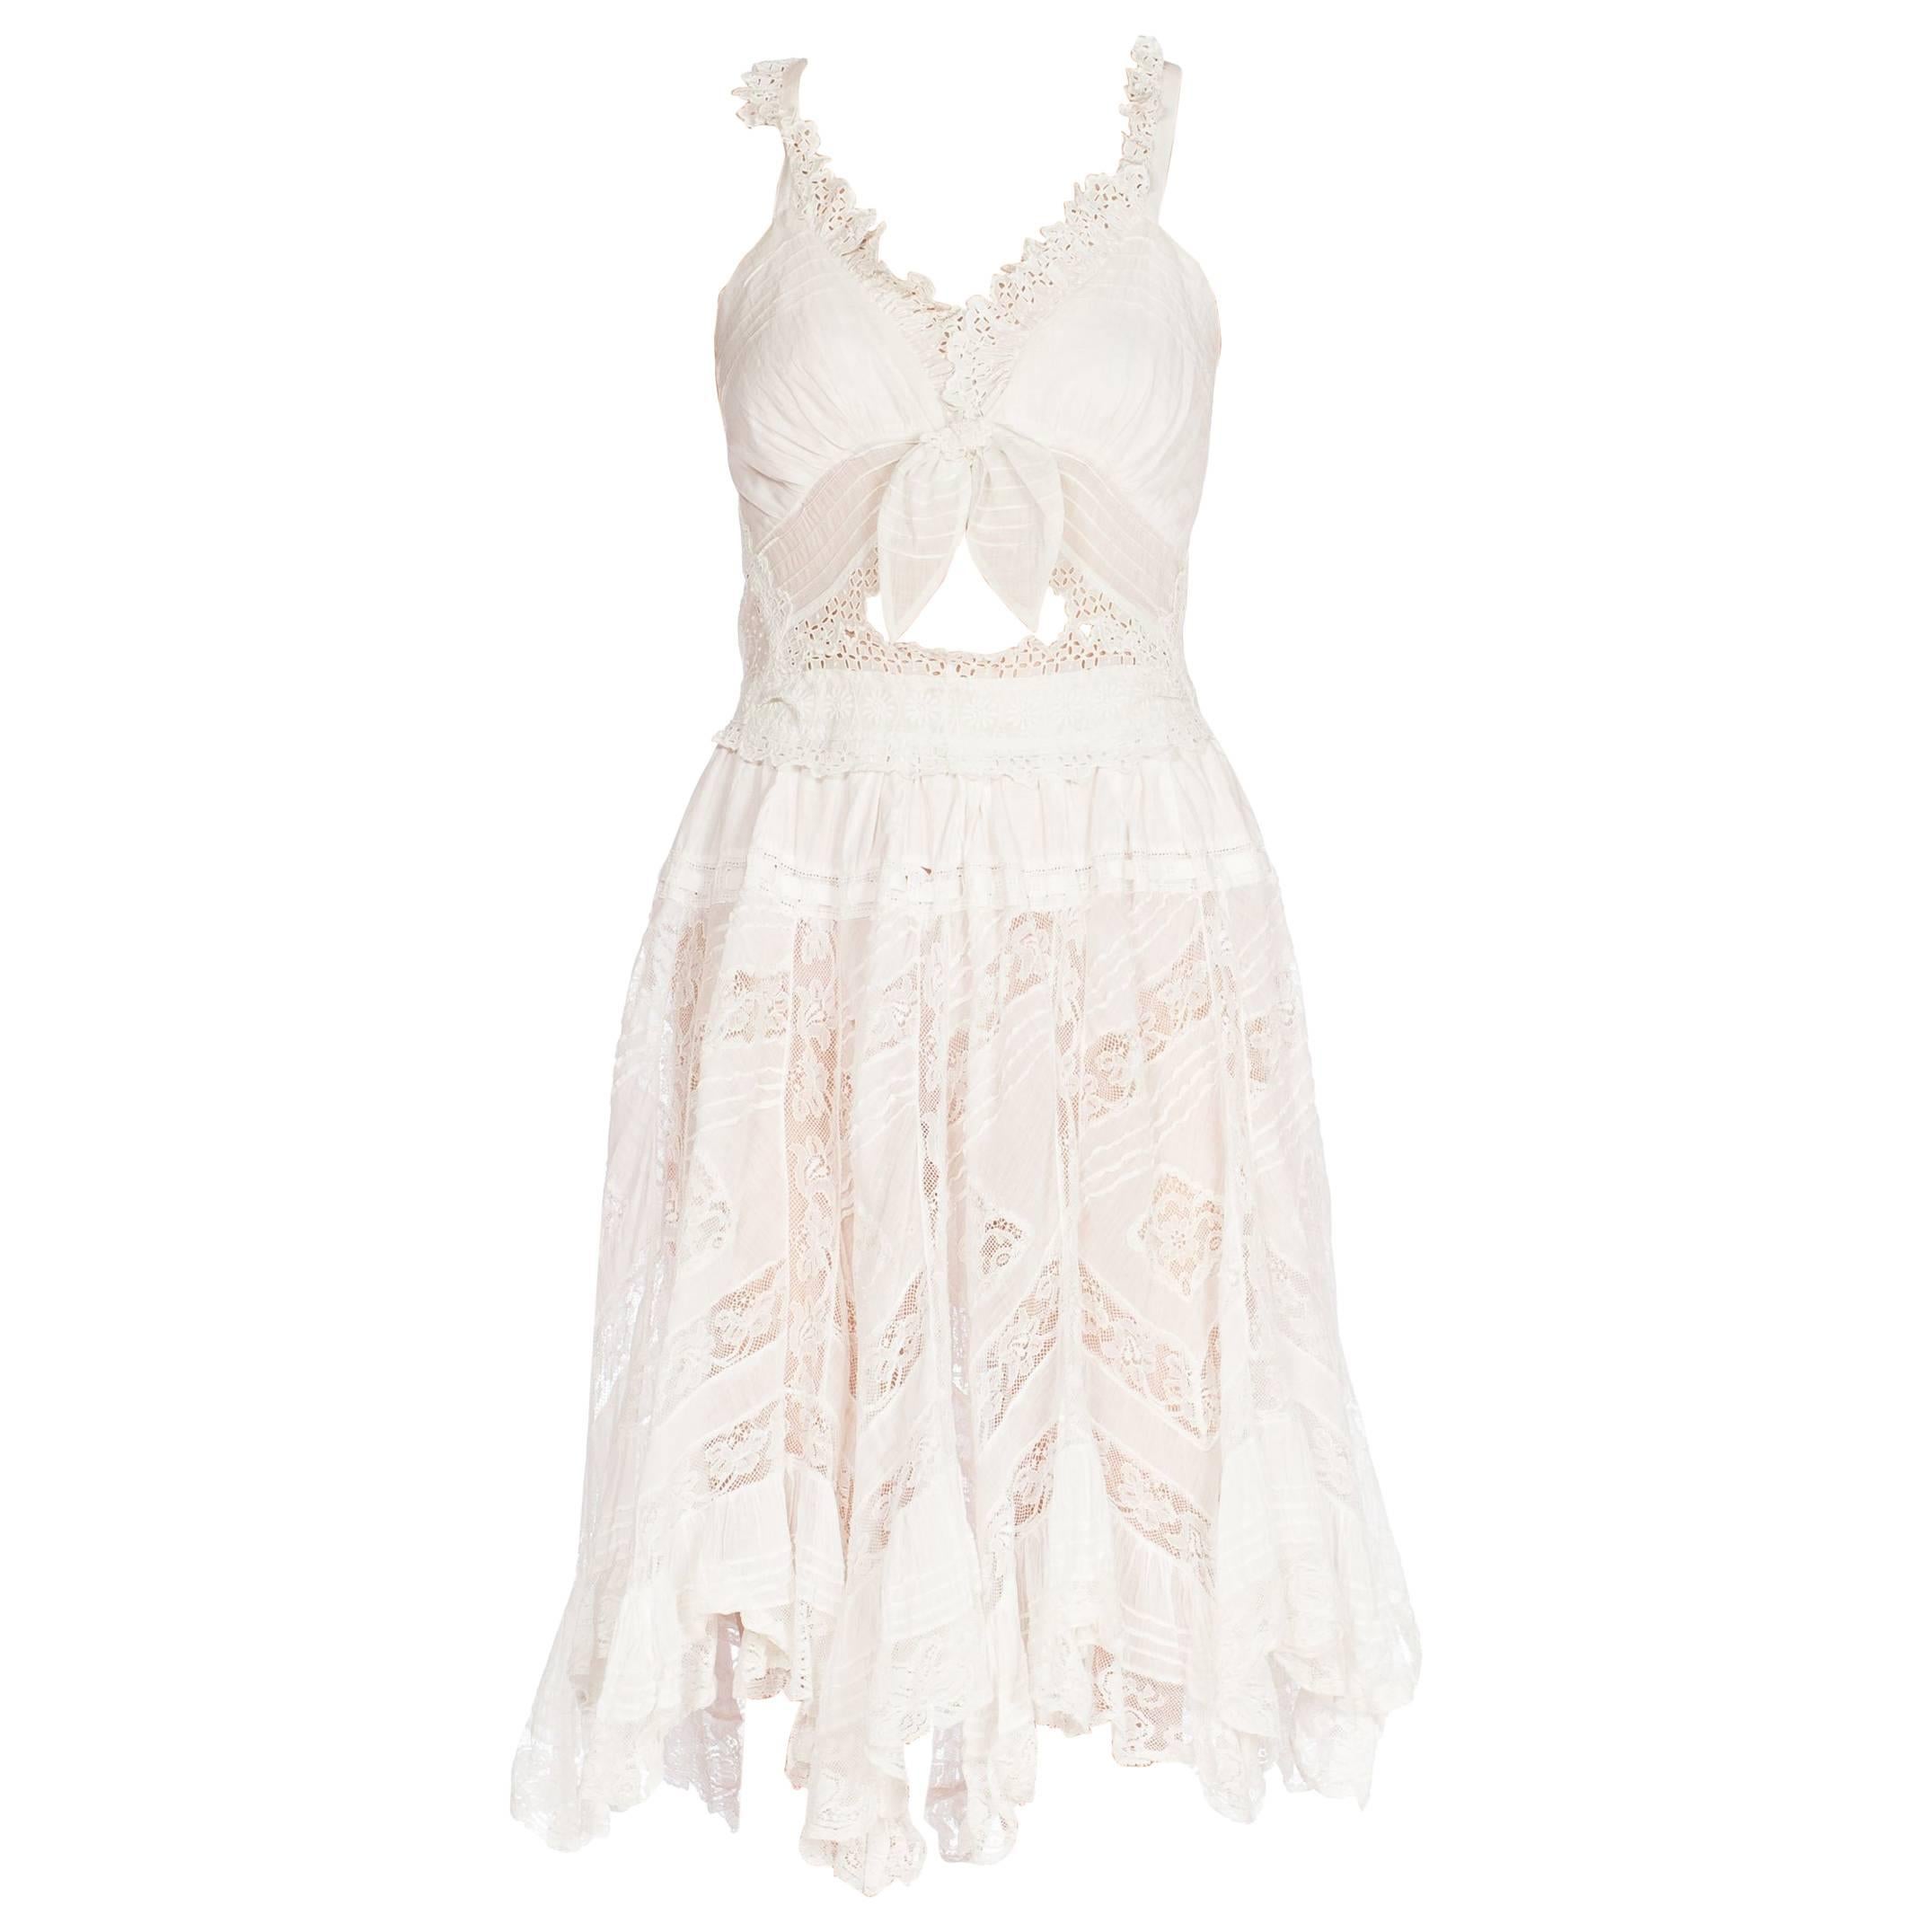 Frilly Victorian White Cotton Lace Dress